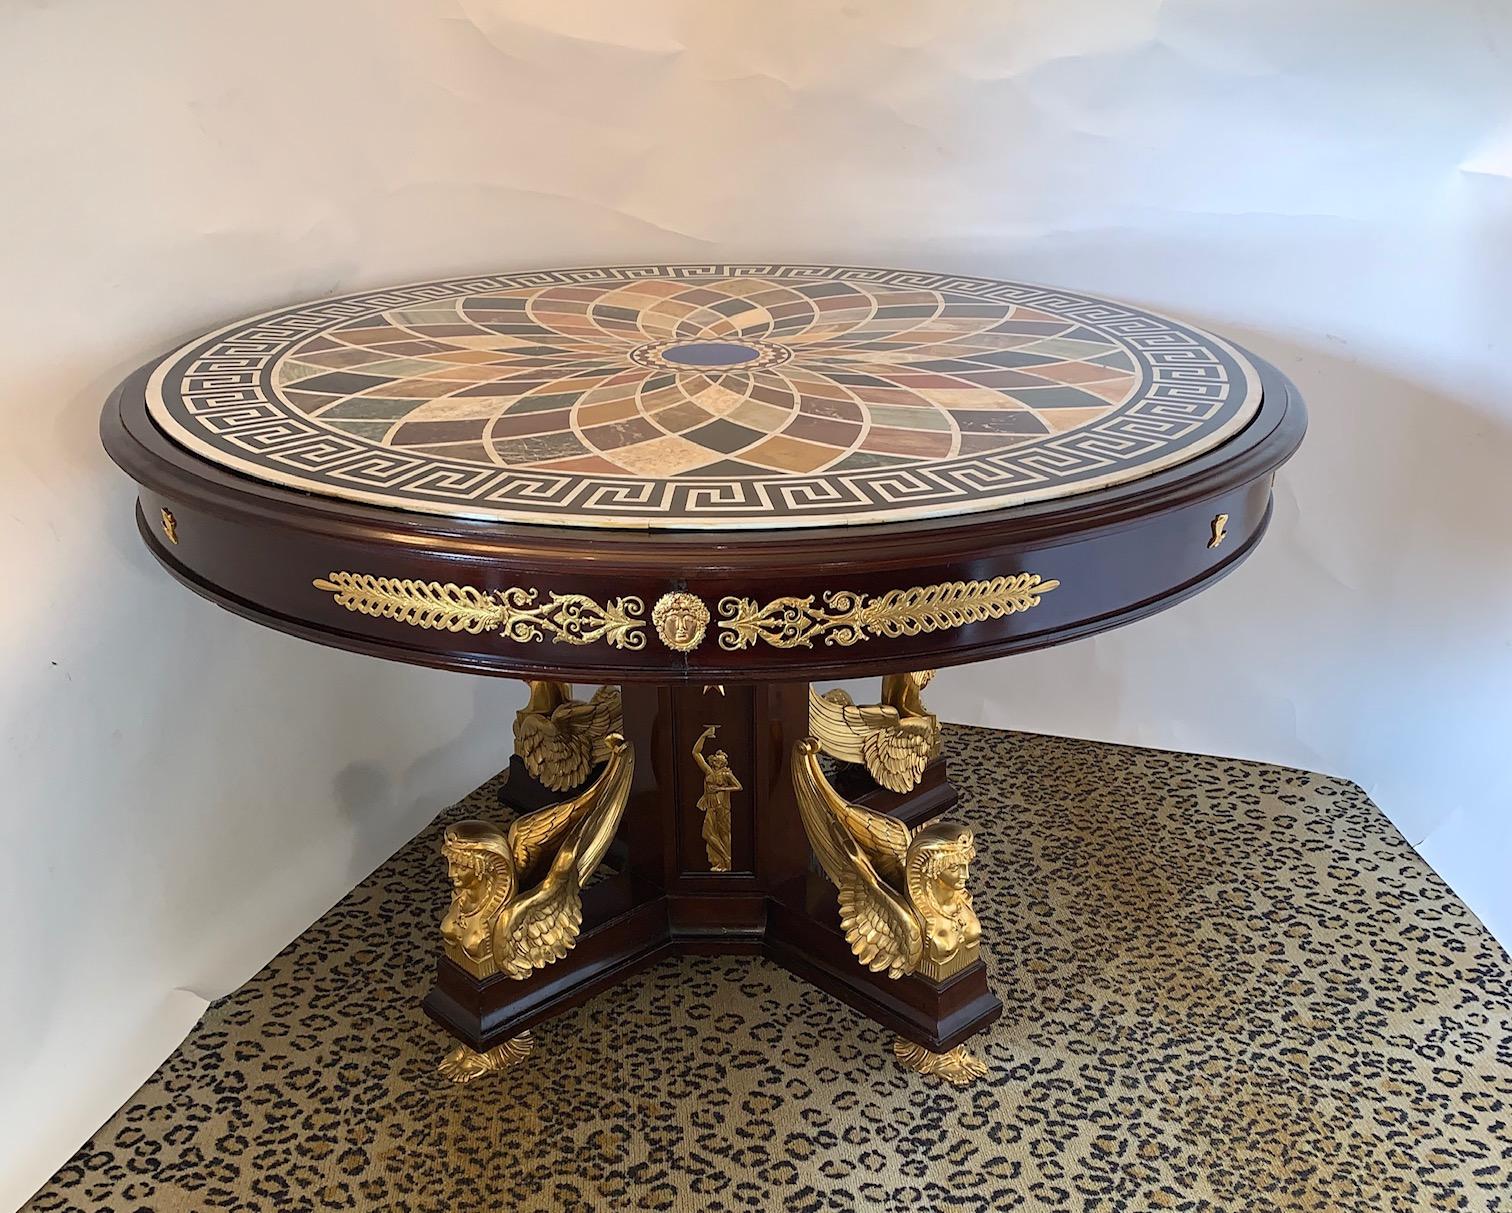 19th century French center table with gilt bronze sphinx and mahogany wood, 19th century, France.